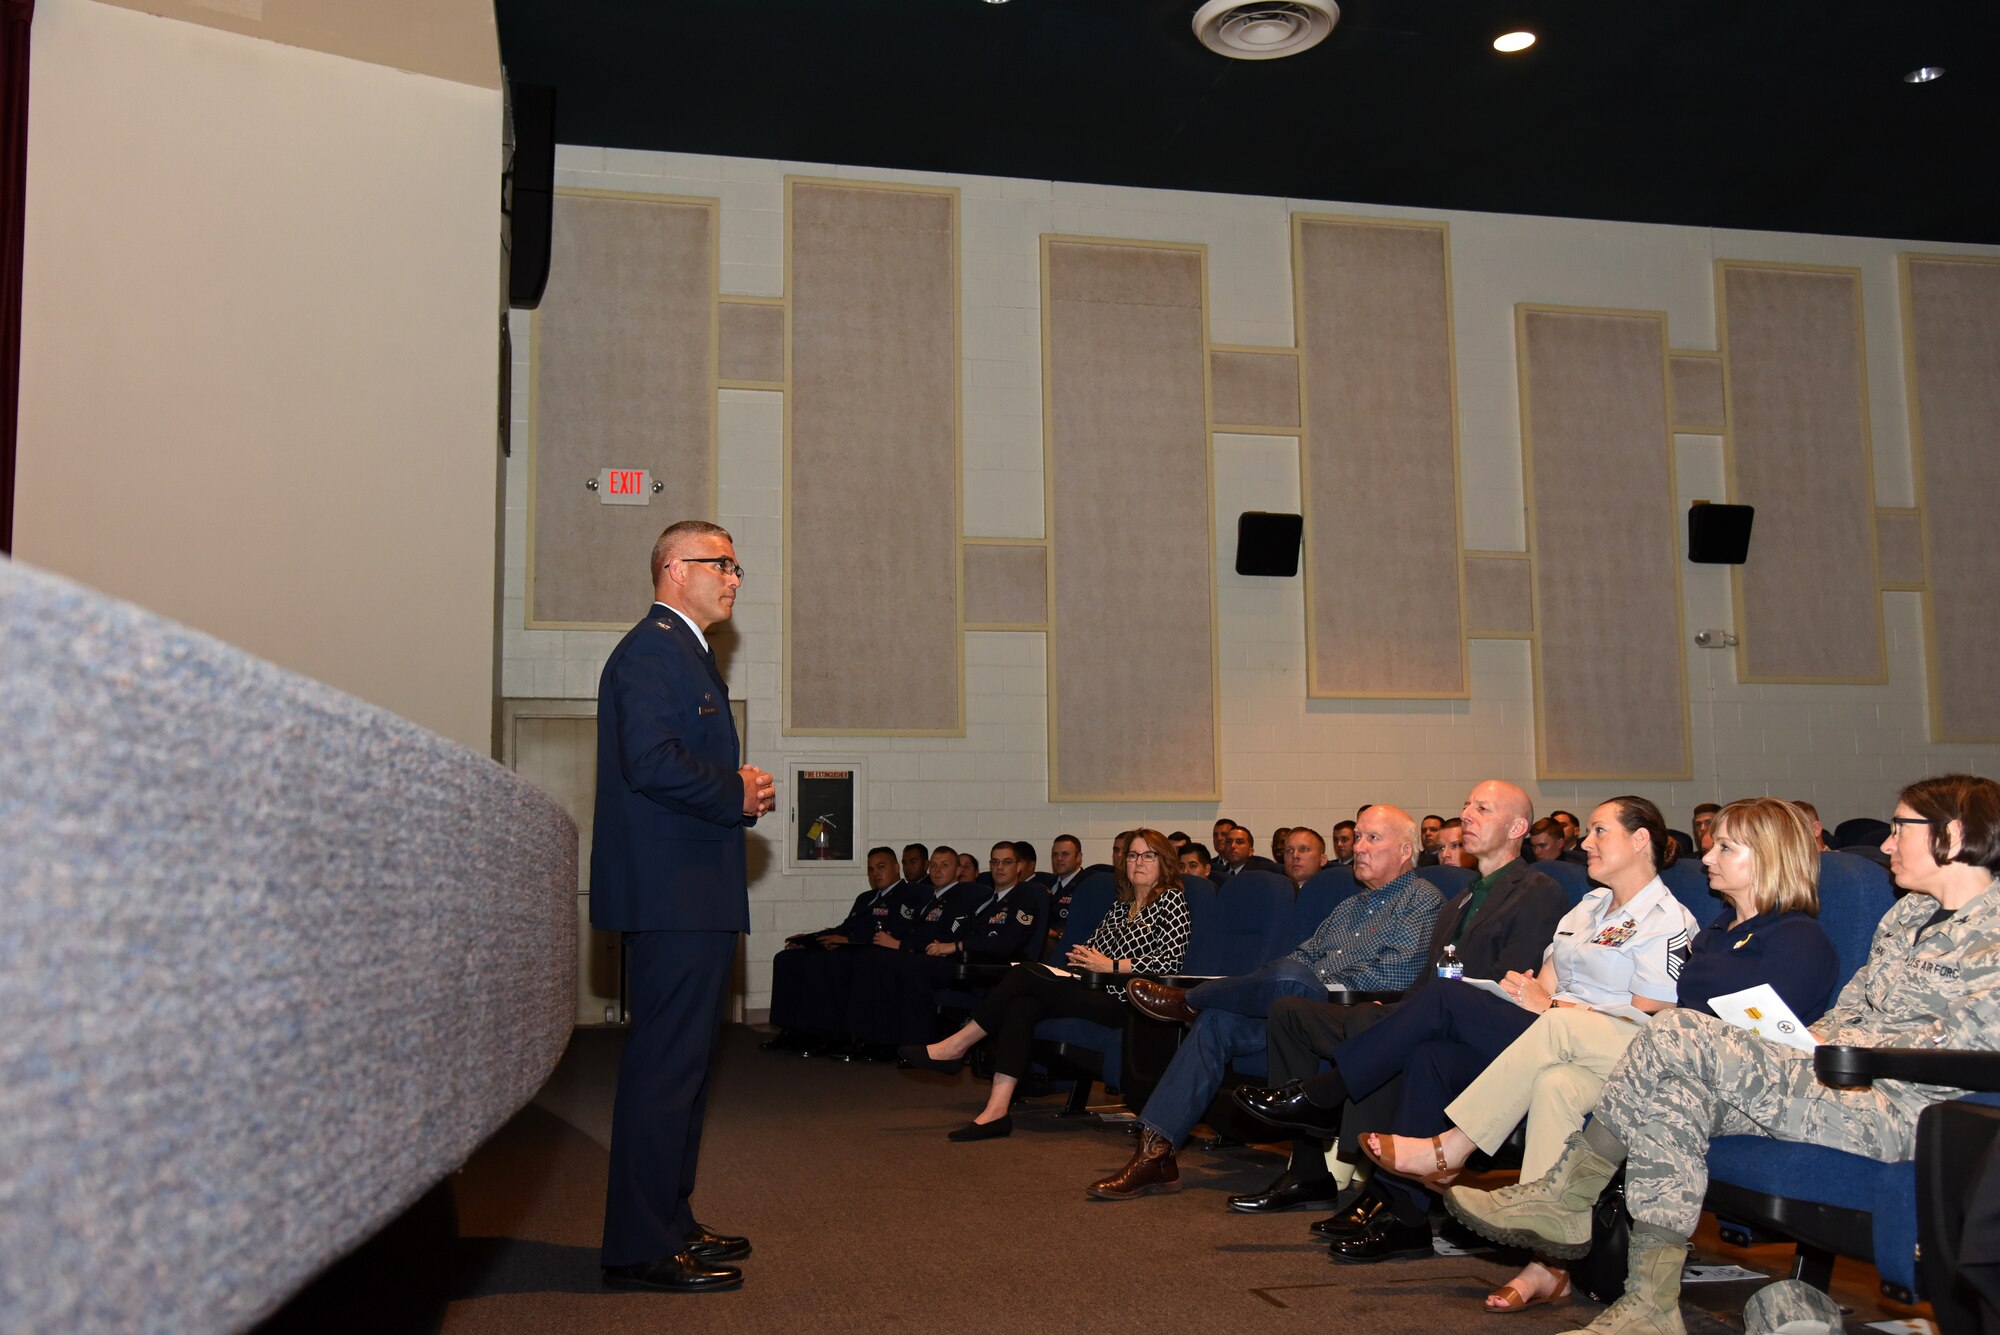 U.S. Air Force Col. Alex Ganster, 17th Training Group commander, speaks during a Community College of the Air Force graduate ceremony at the base theater on Goodfellow Air Force Base, Texas, June 15, 2018. Ganster thanked the graduates and also talked about how being an educated force makes us superior to our adversaries. (U.S. Air Force photo by Staff Sgt. Joshua Edwards/Released)